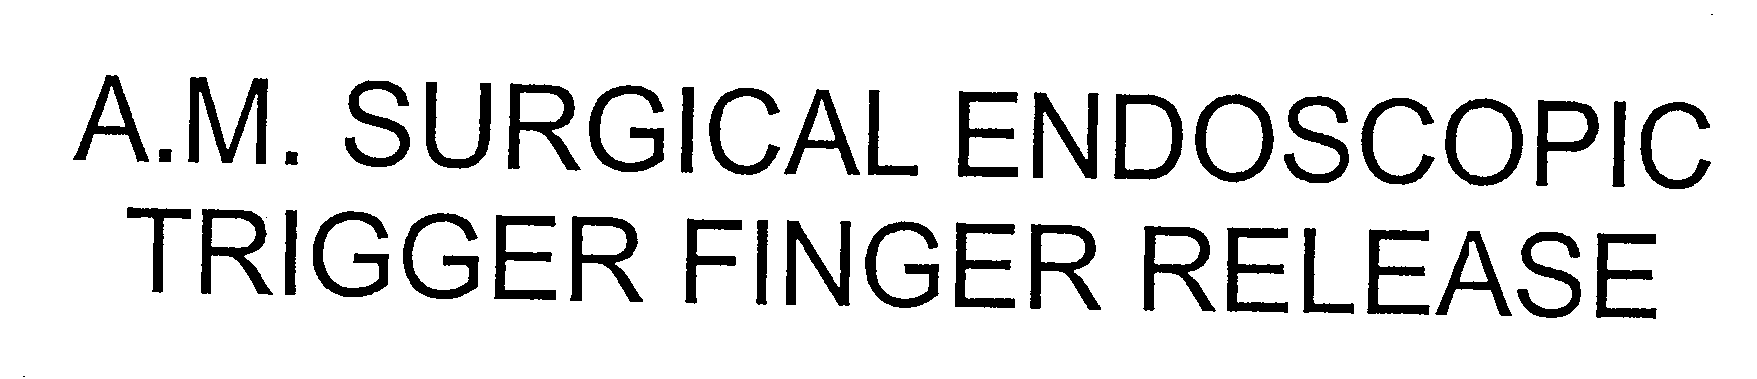  A.M. SURGICAL ENDOSCOPIC TRIGGER FINGER RELEASE